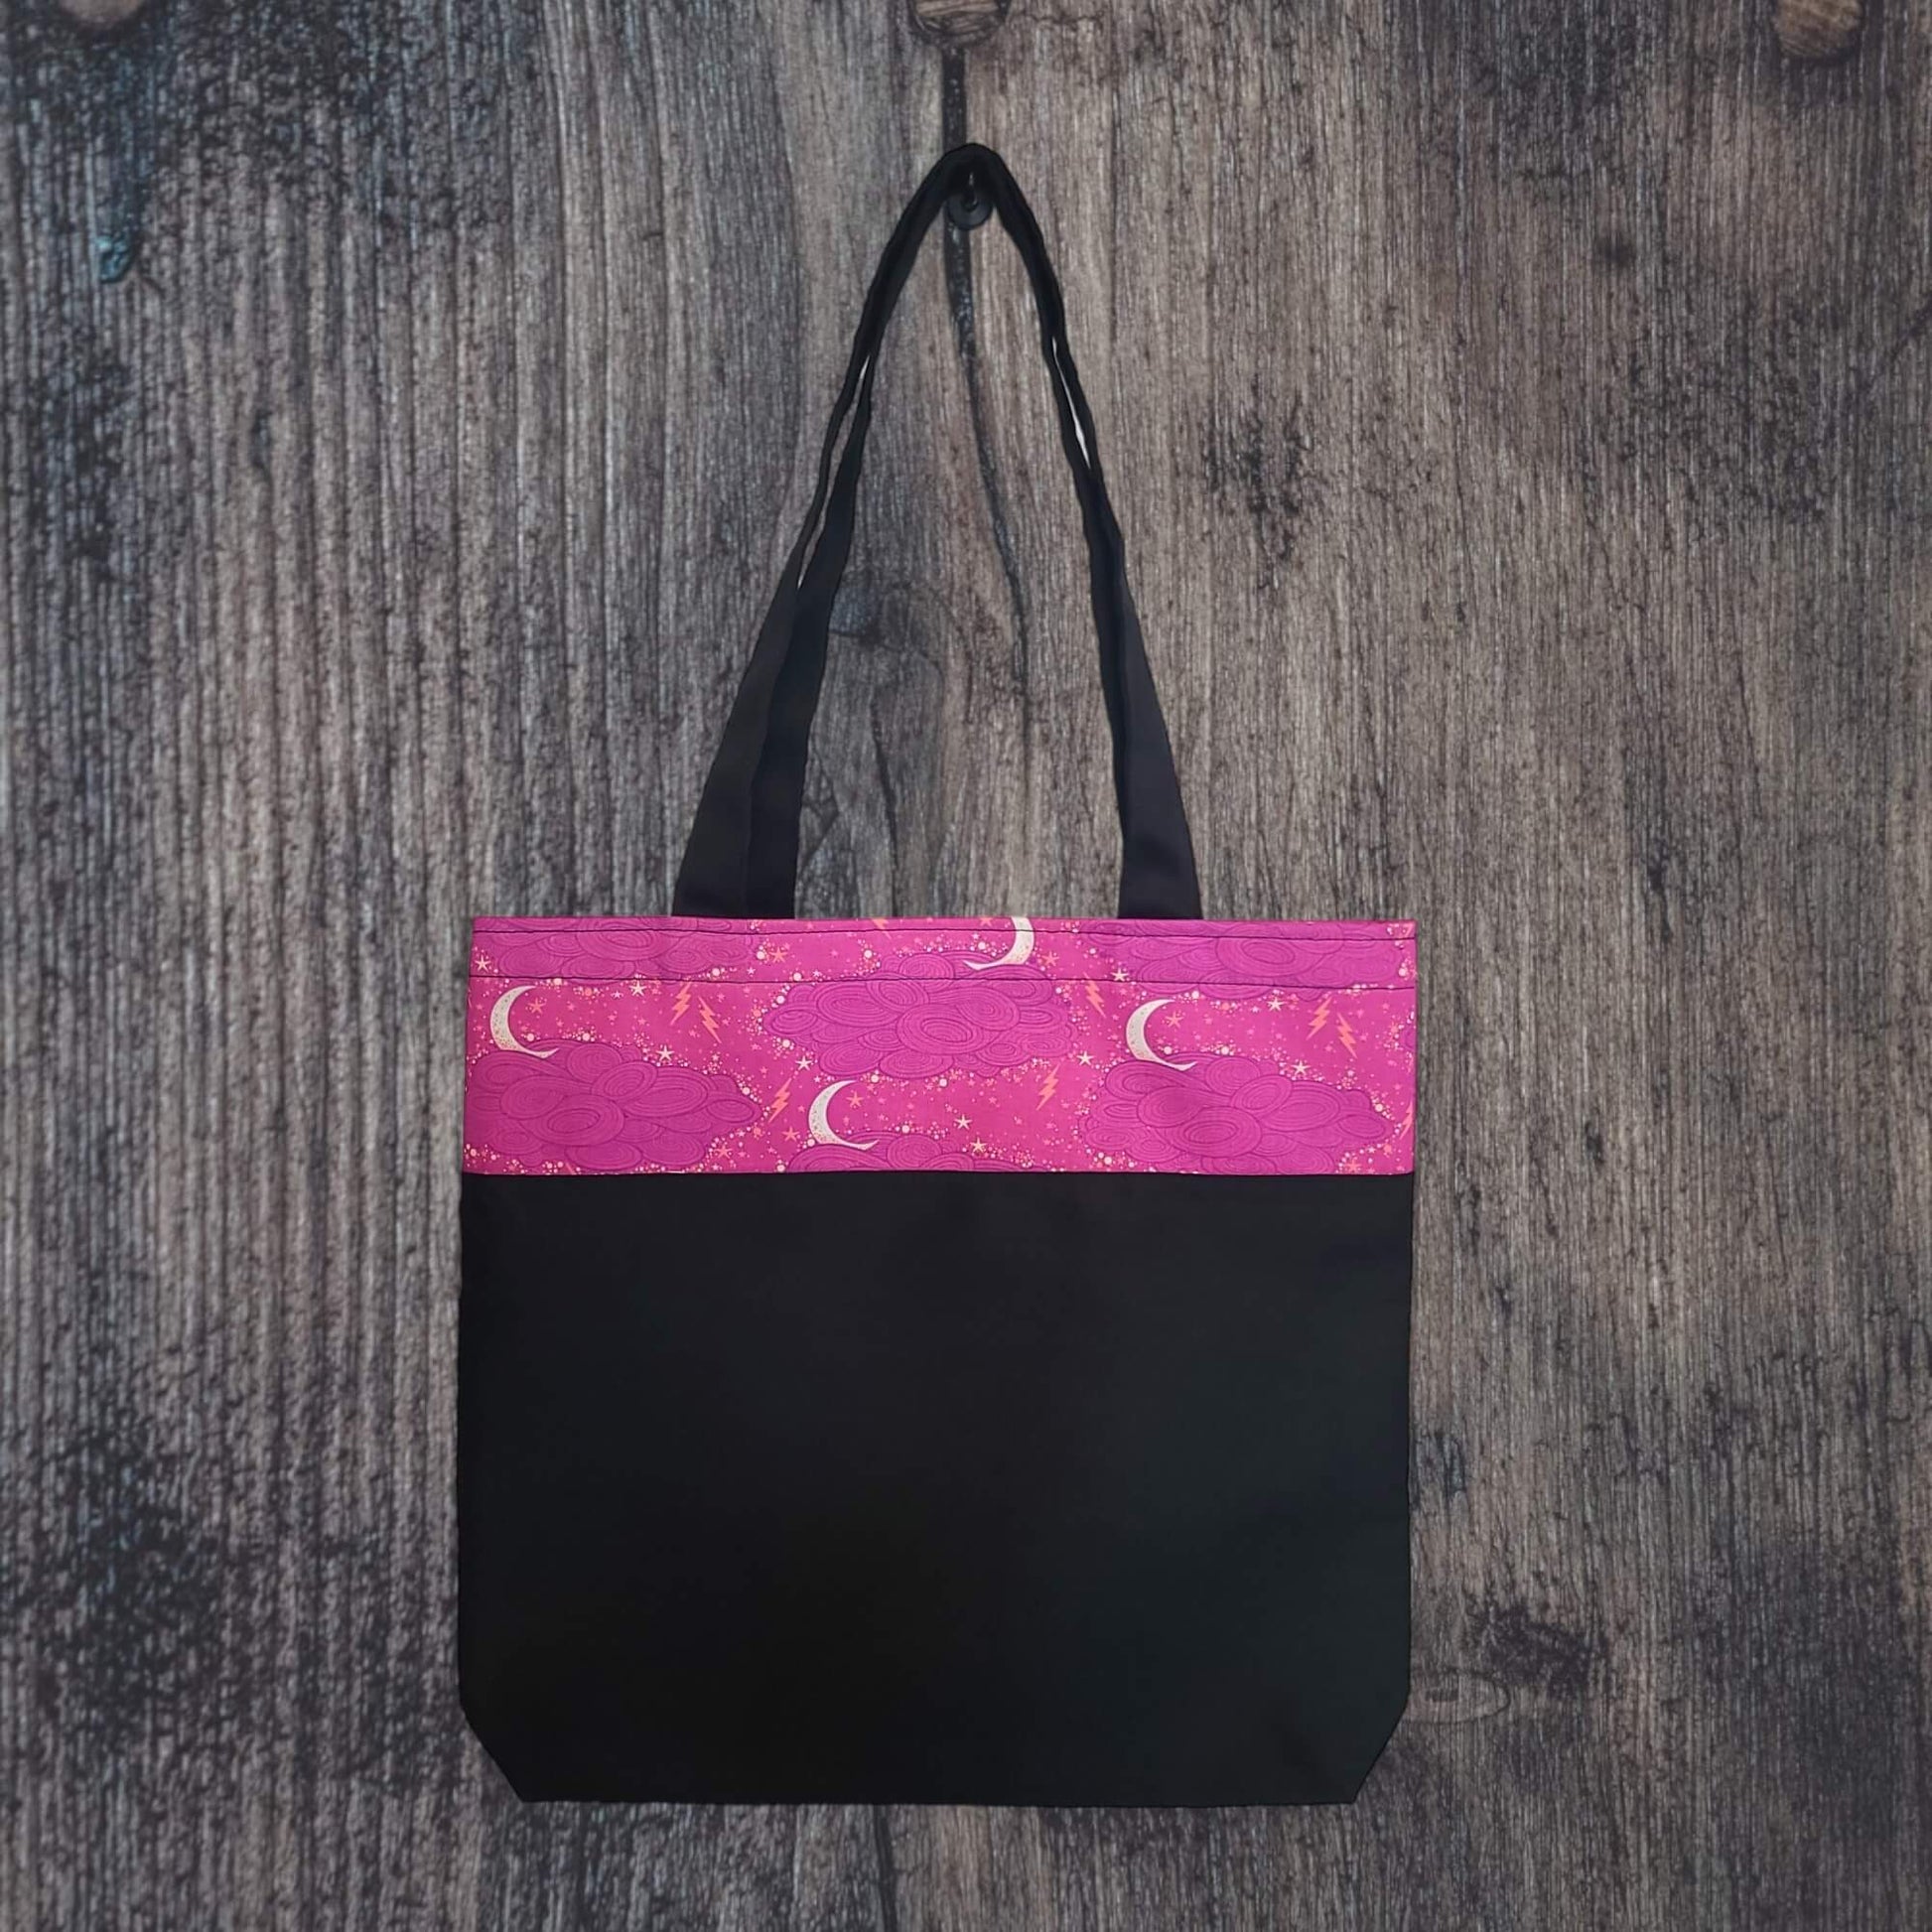 our accent tote bag featuring our Pink Moonlight pattern.